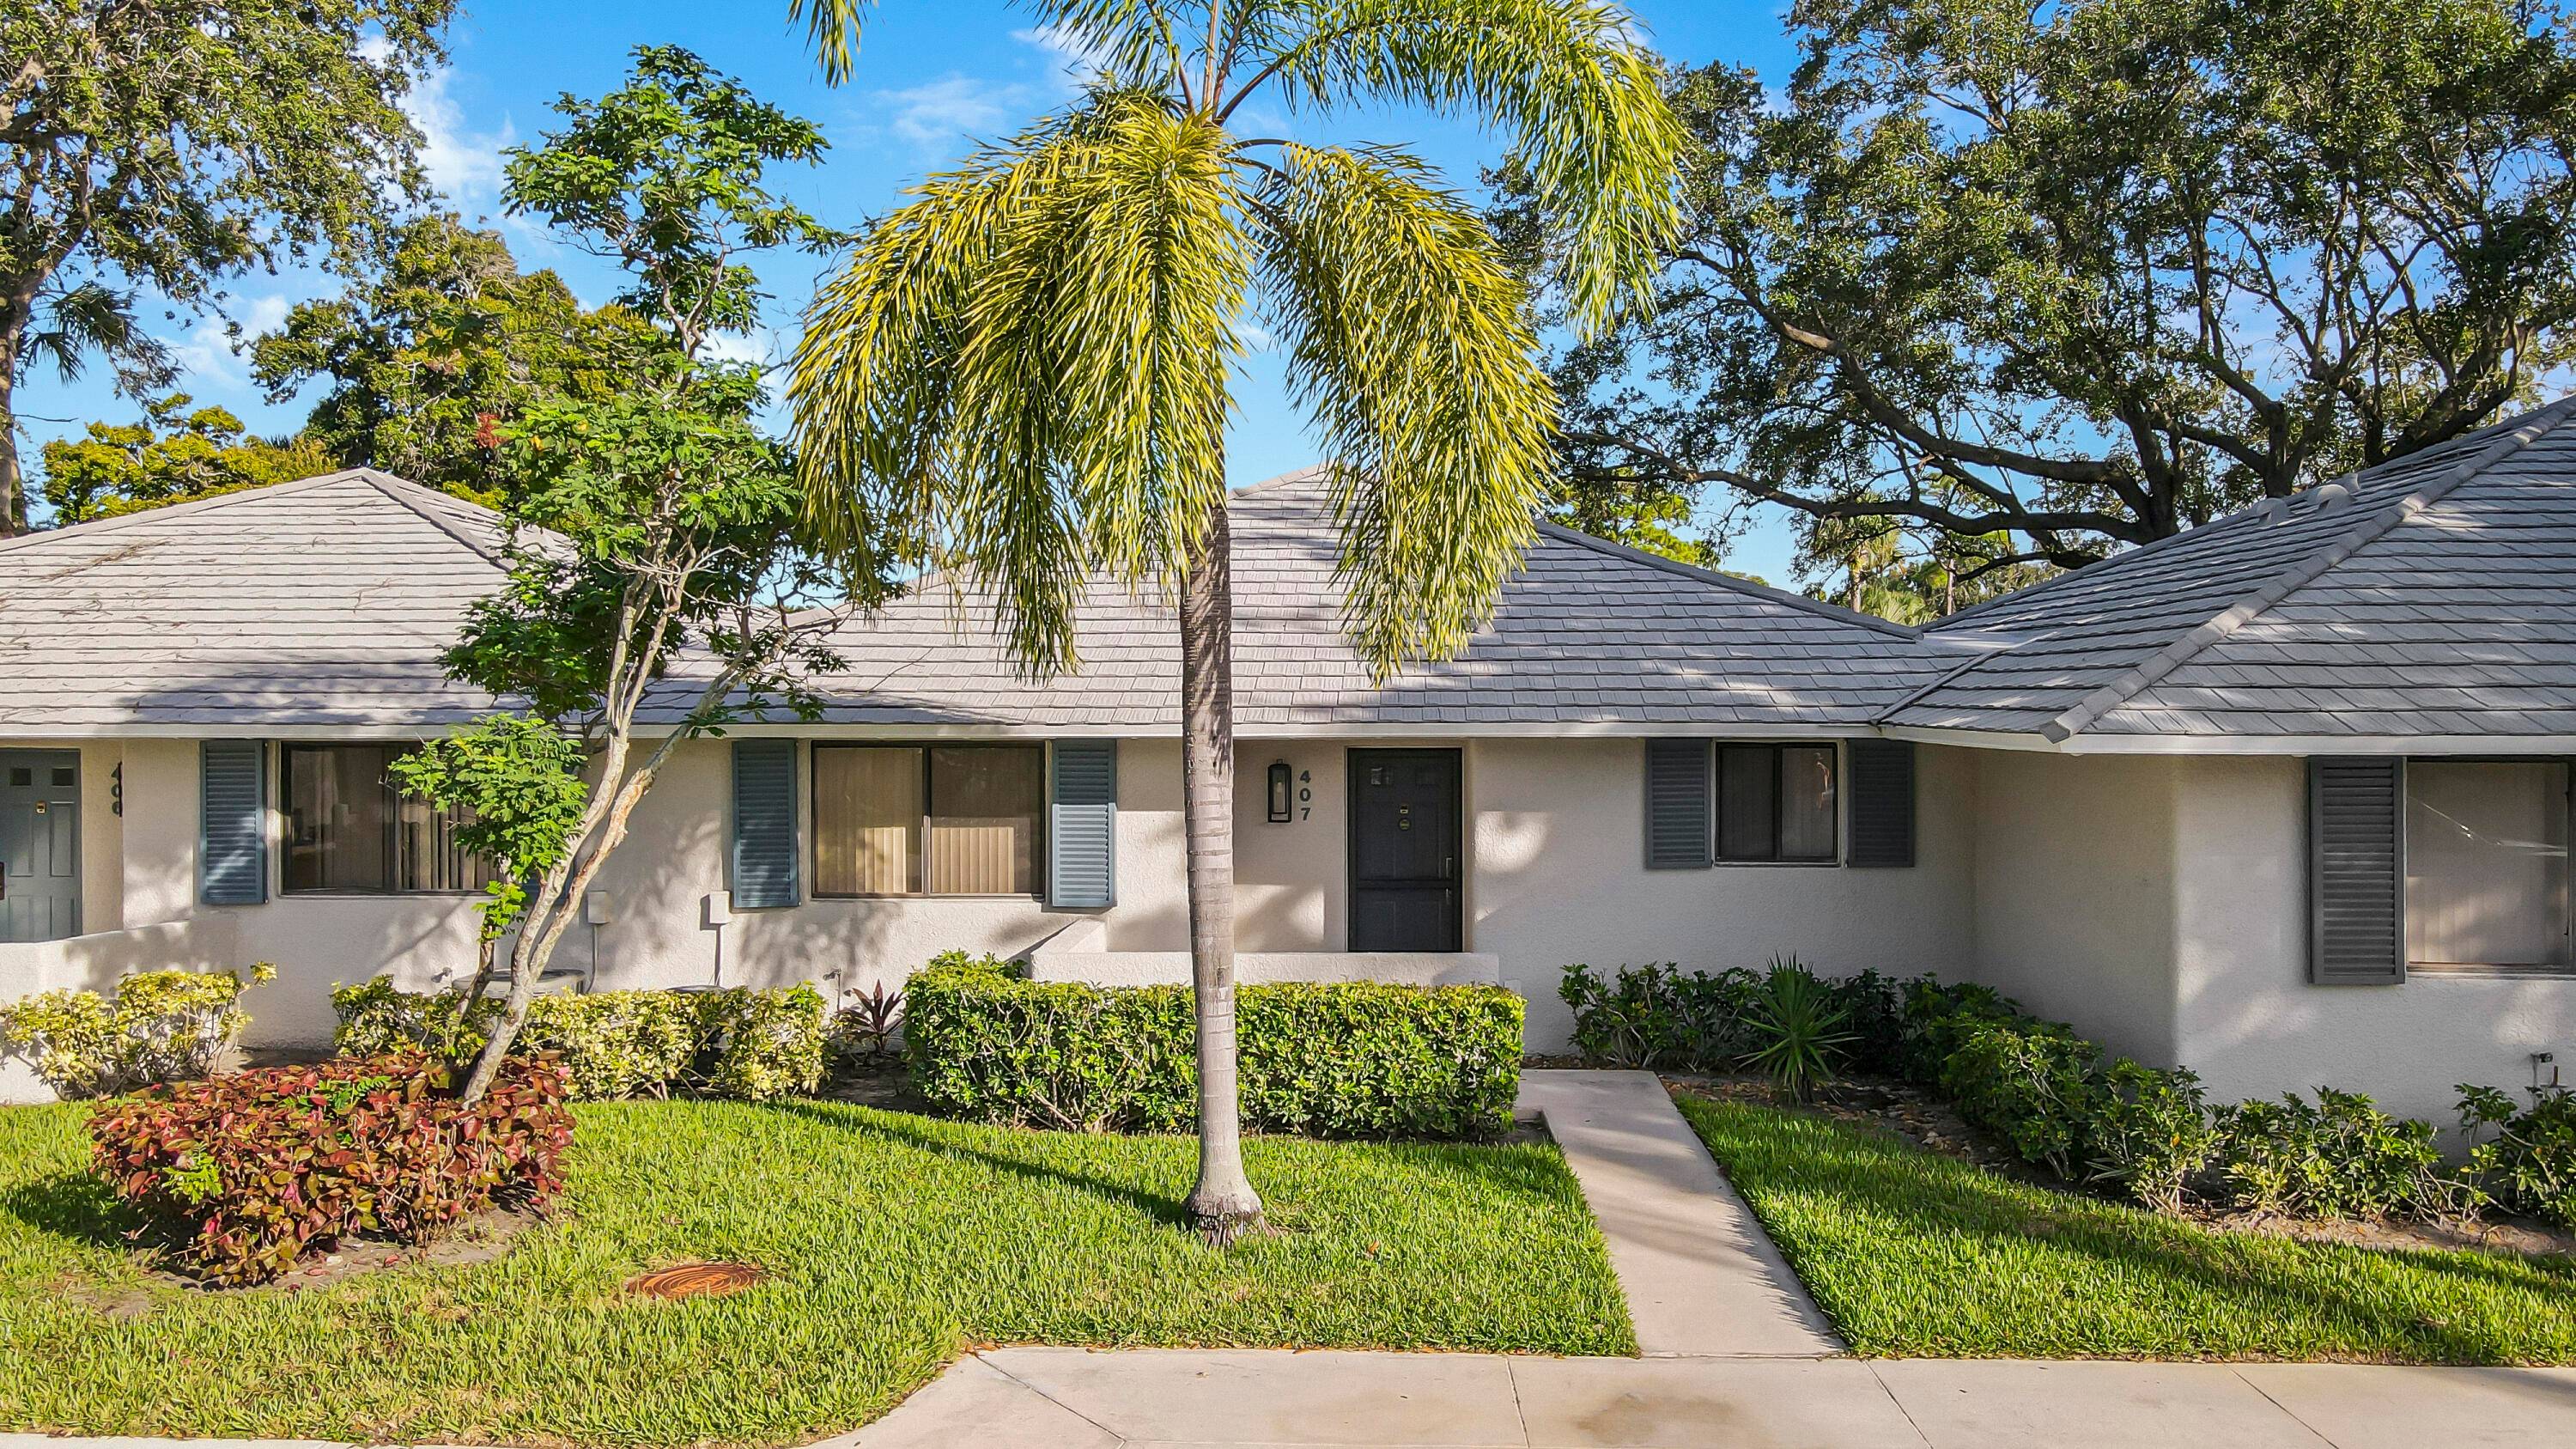 Newly offered TURN KEY Club Cottage in the highly desirable gated golf community of PGA National.